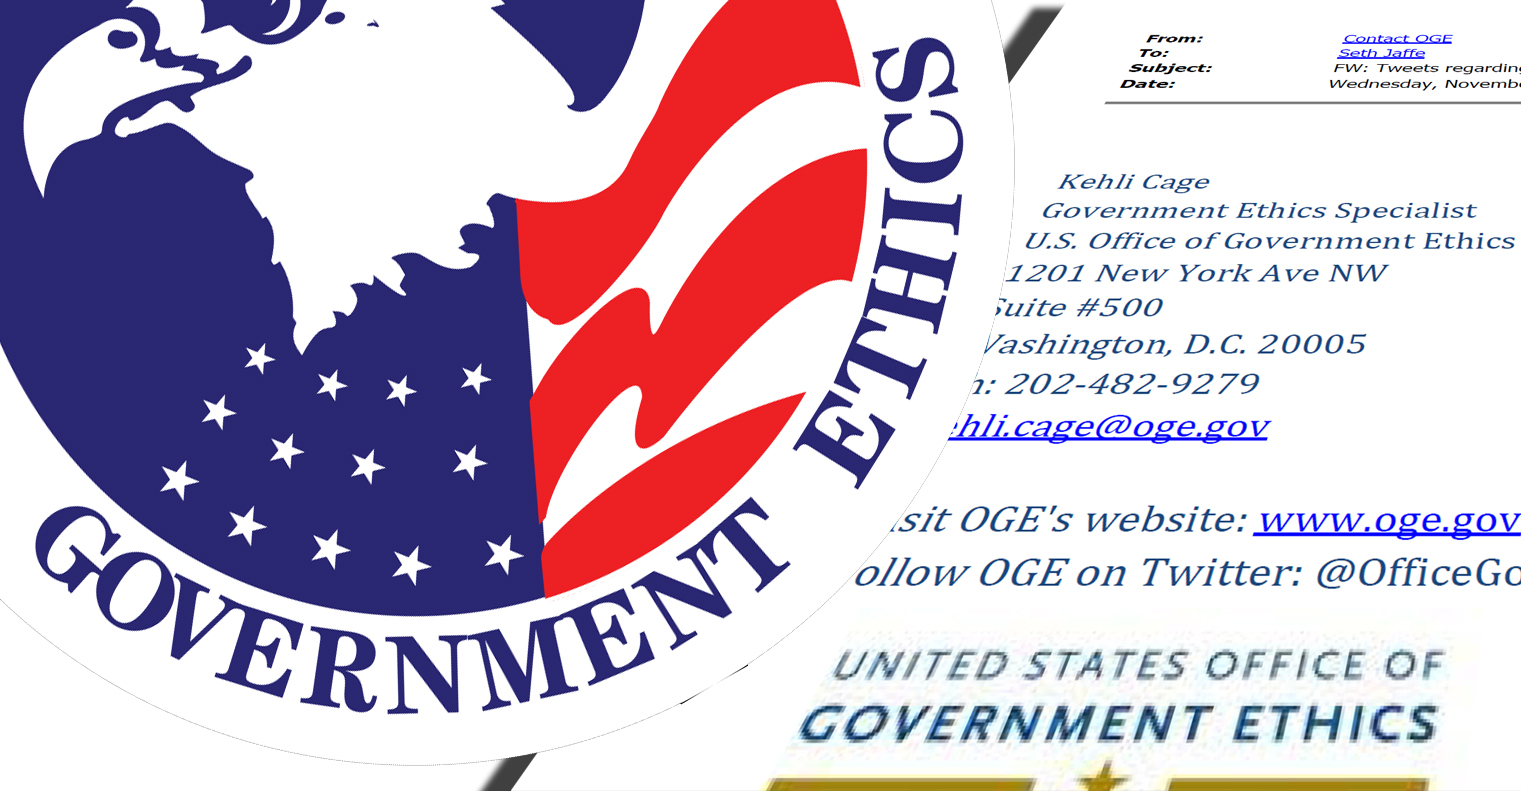 Office of Government Ethics (OGE) E-Mails of Seth Jaffe